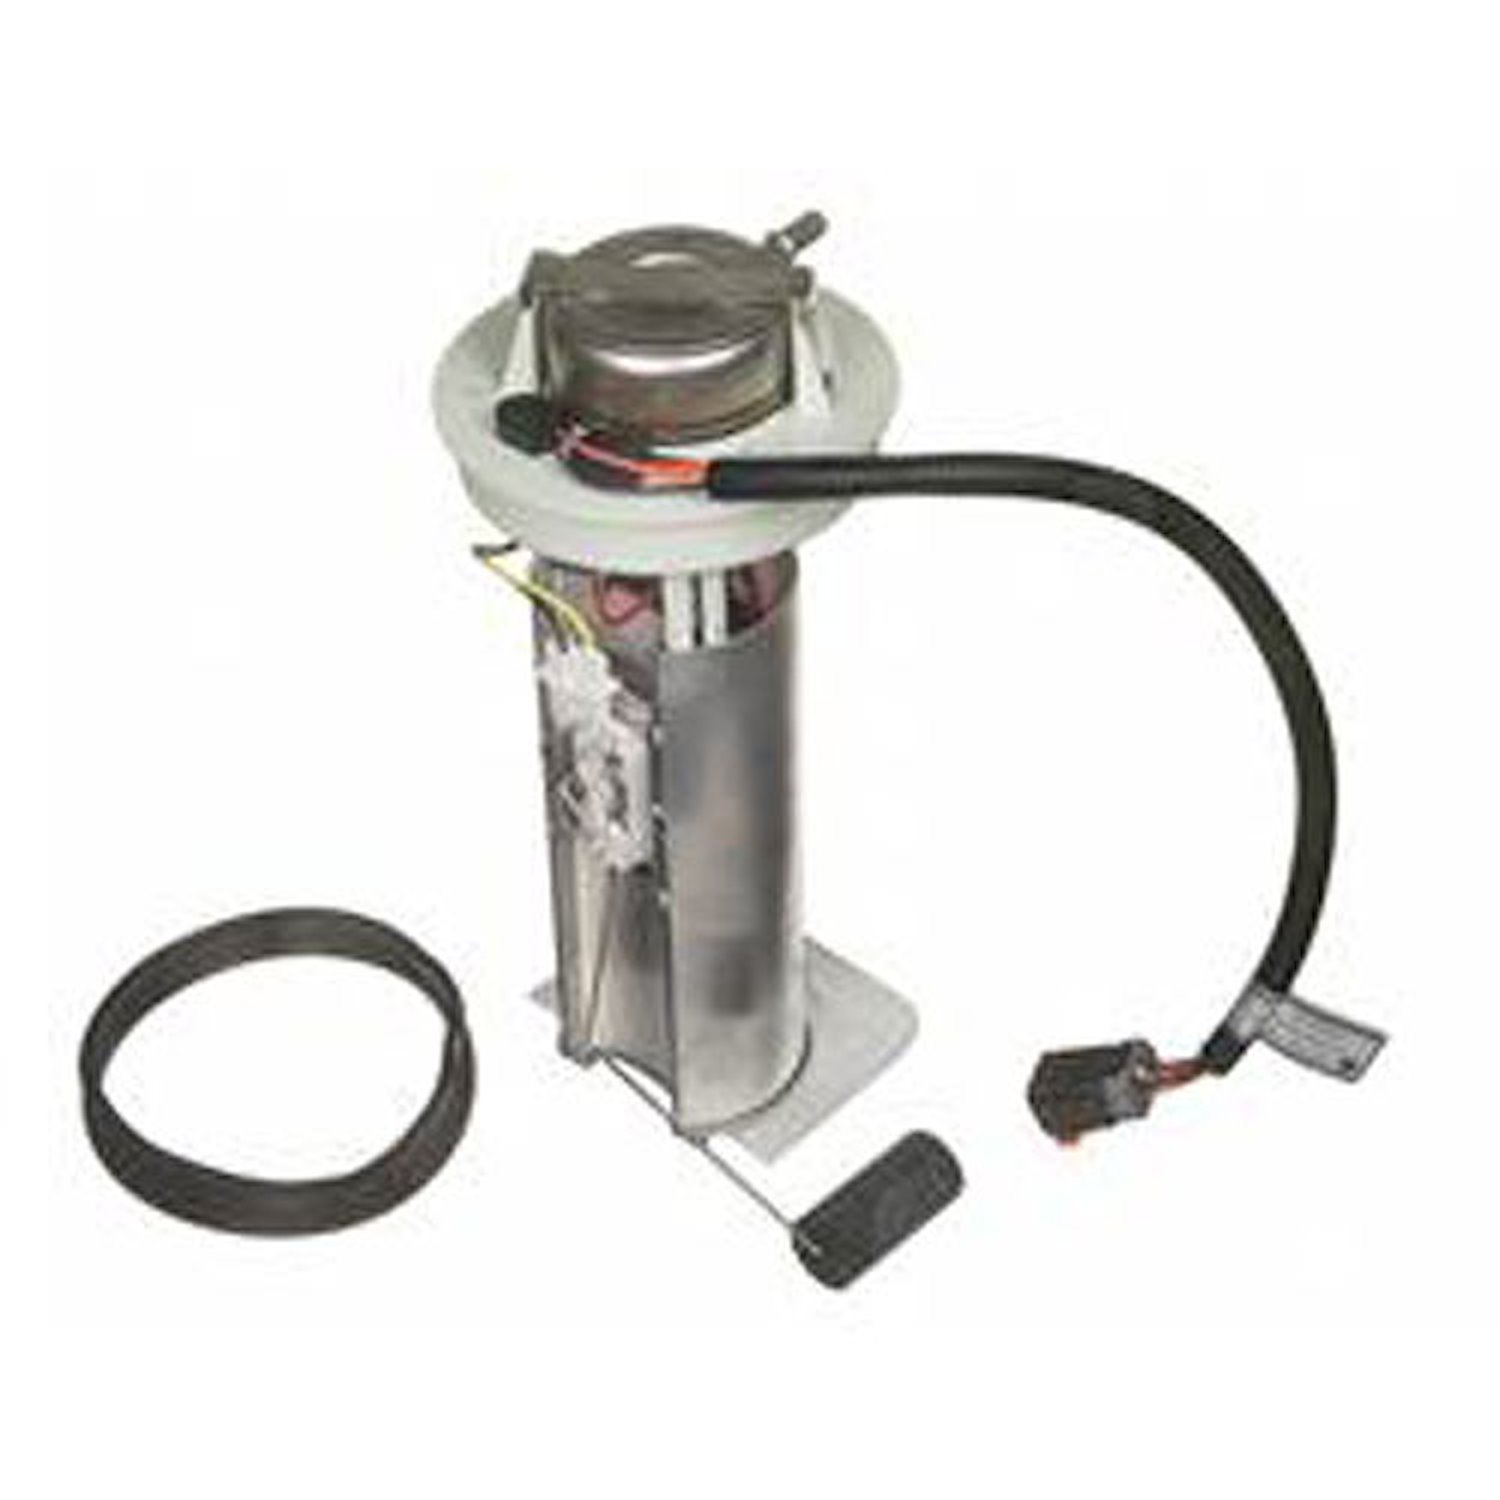 OE Chrysler/Dodge/Jeep Replacement Electric Fuel Pump Module Assembly 1997-01 Jeep Cherokee 2.5L L4/4.0L L6